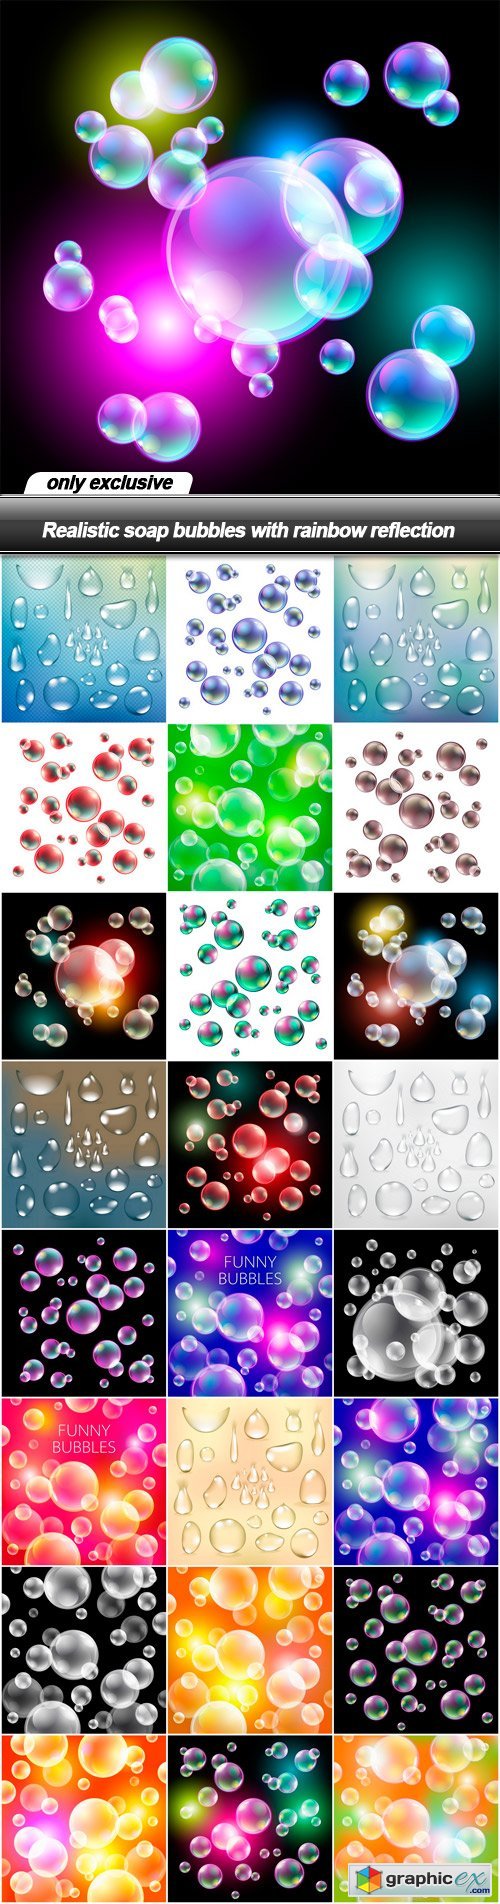 Realistic soap bubbles with rainbow reflection - 25 EPS